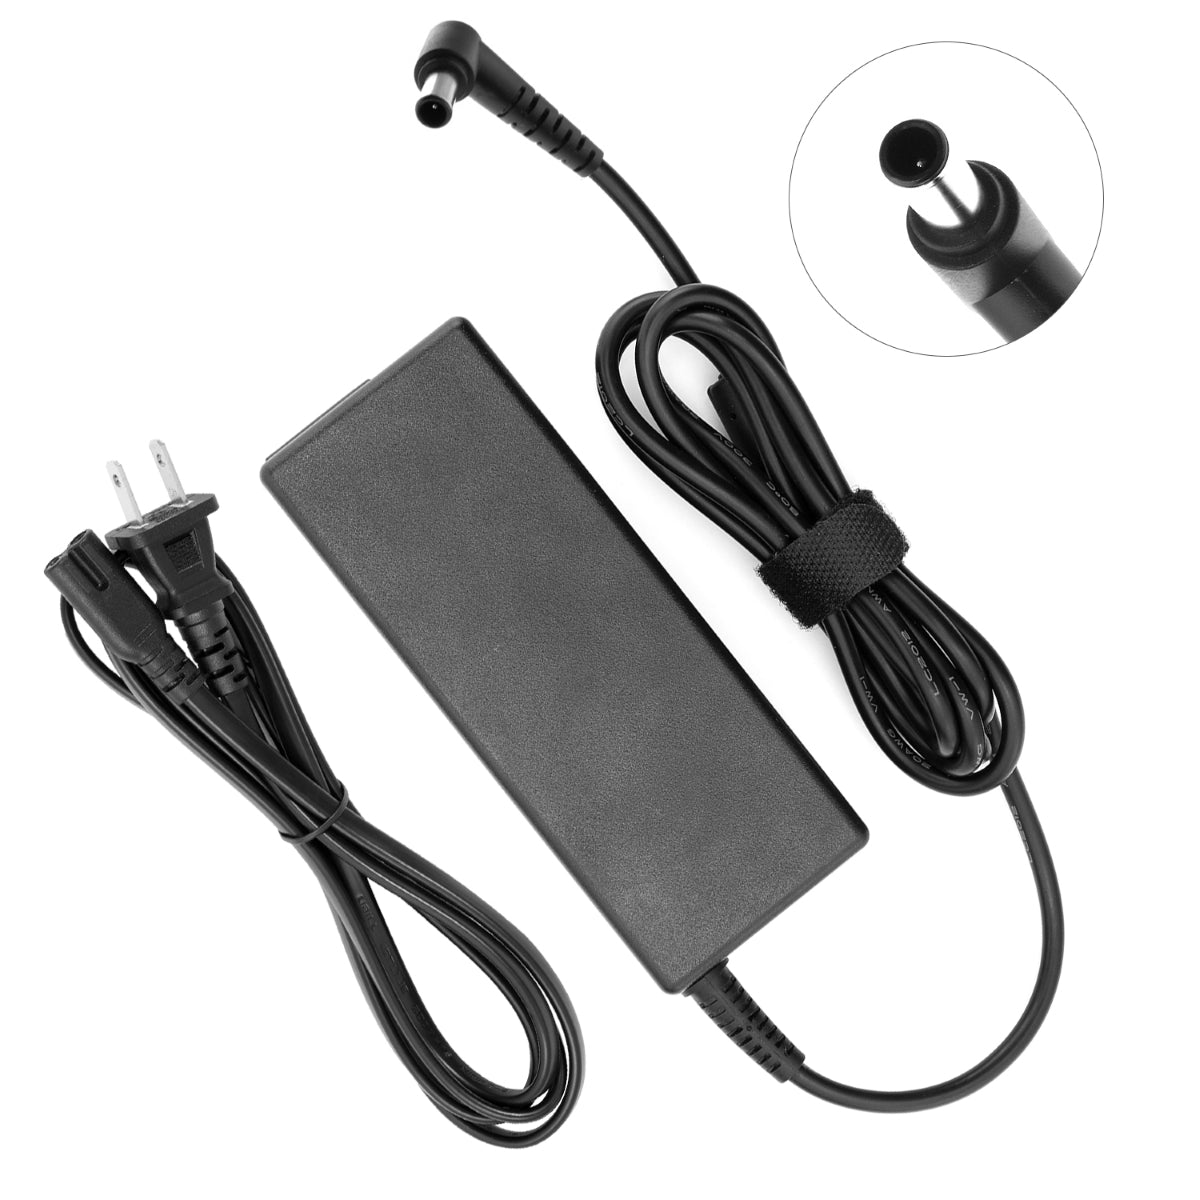 Compatible Charger for Sony Vaio VGN-FZ430E